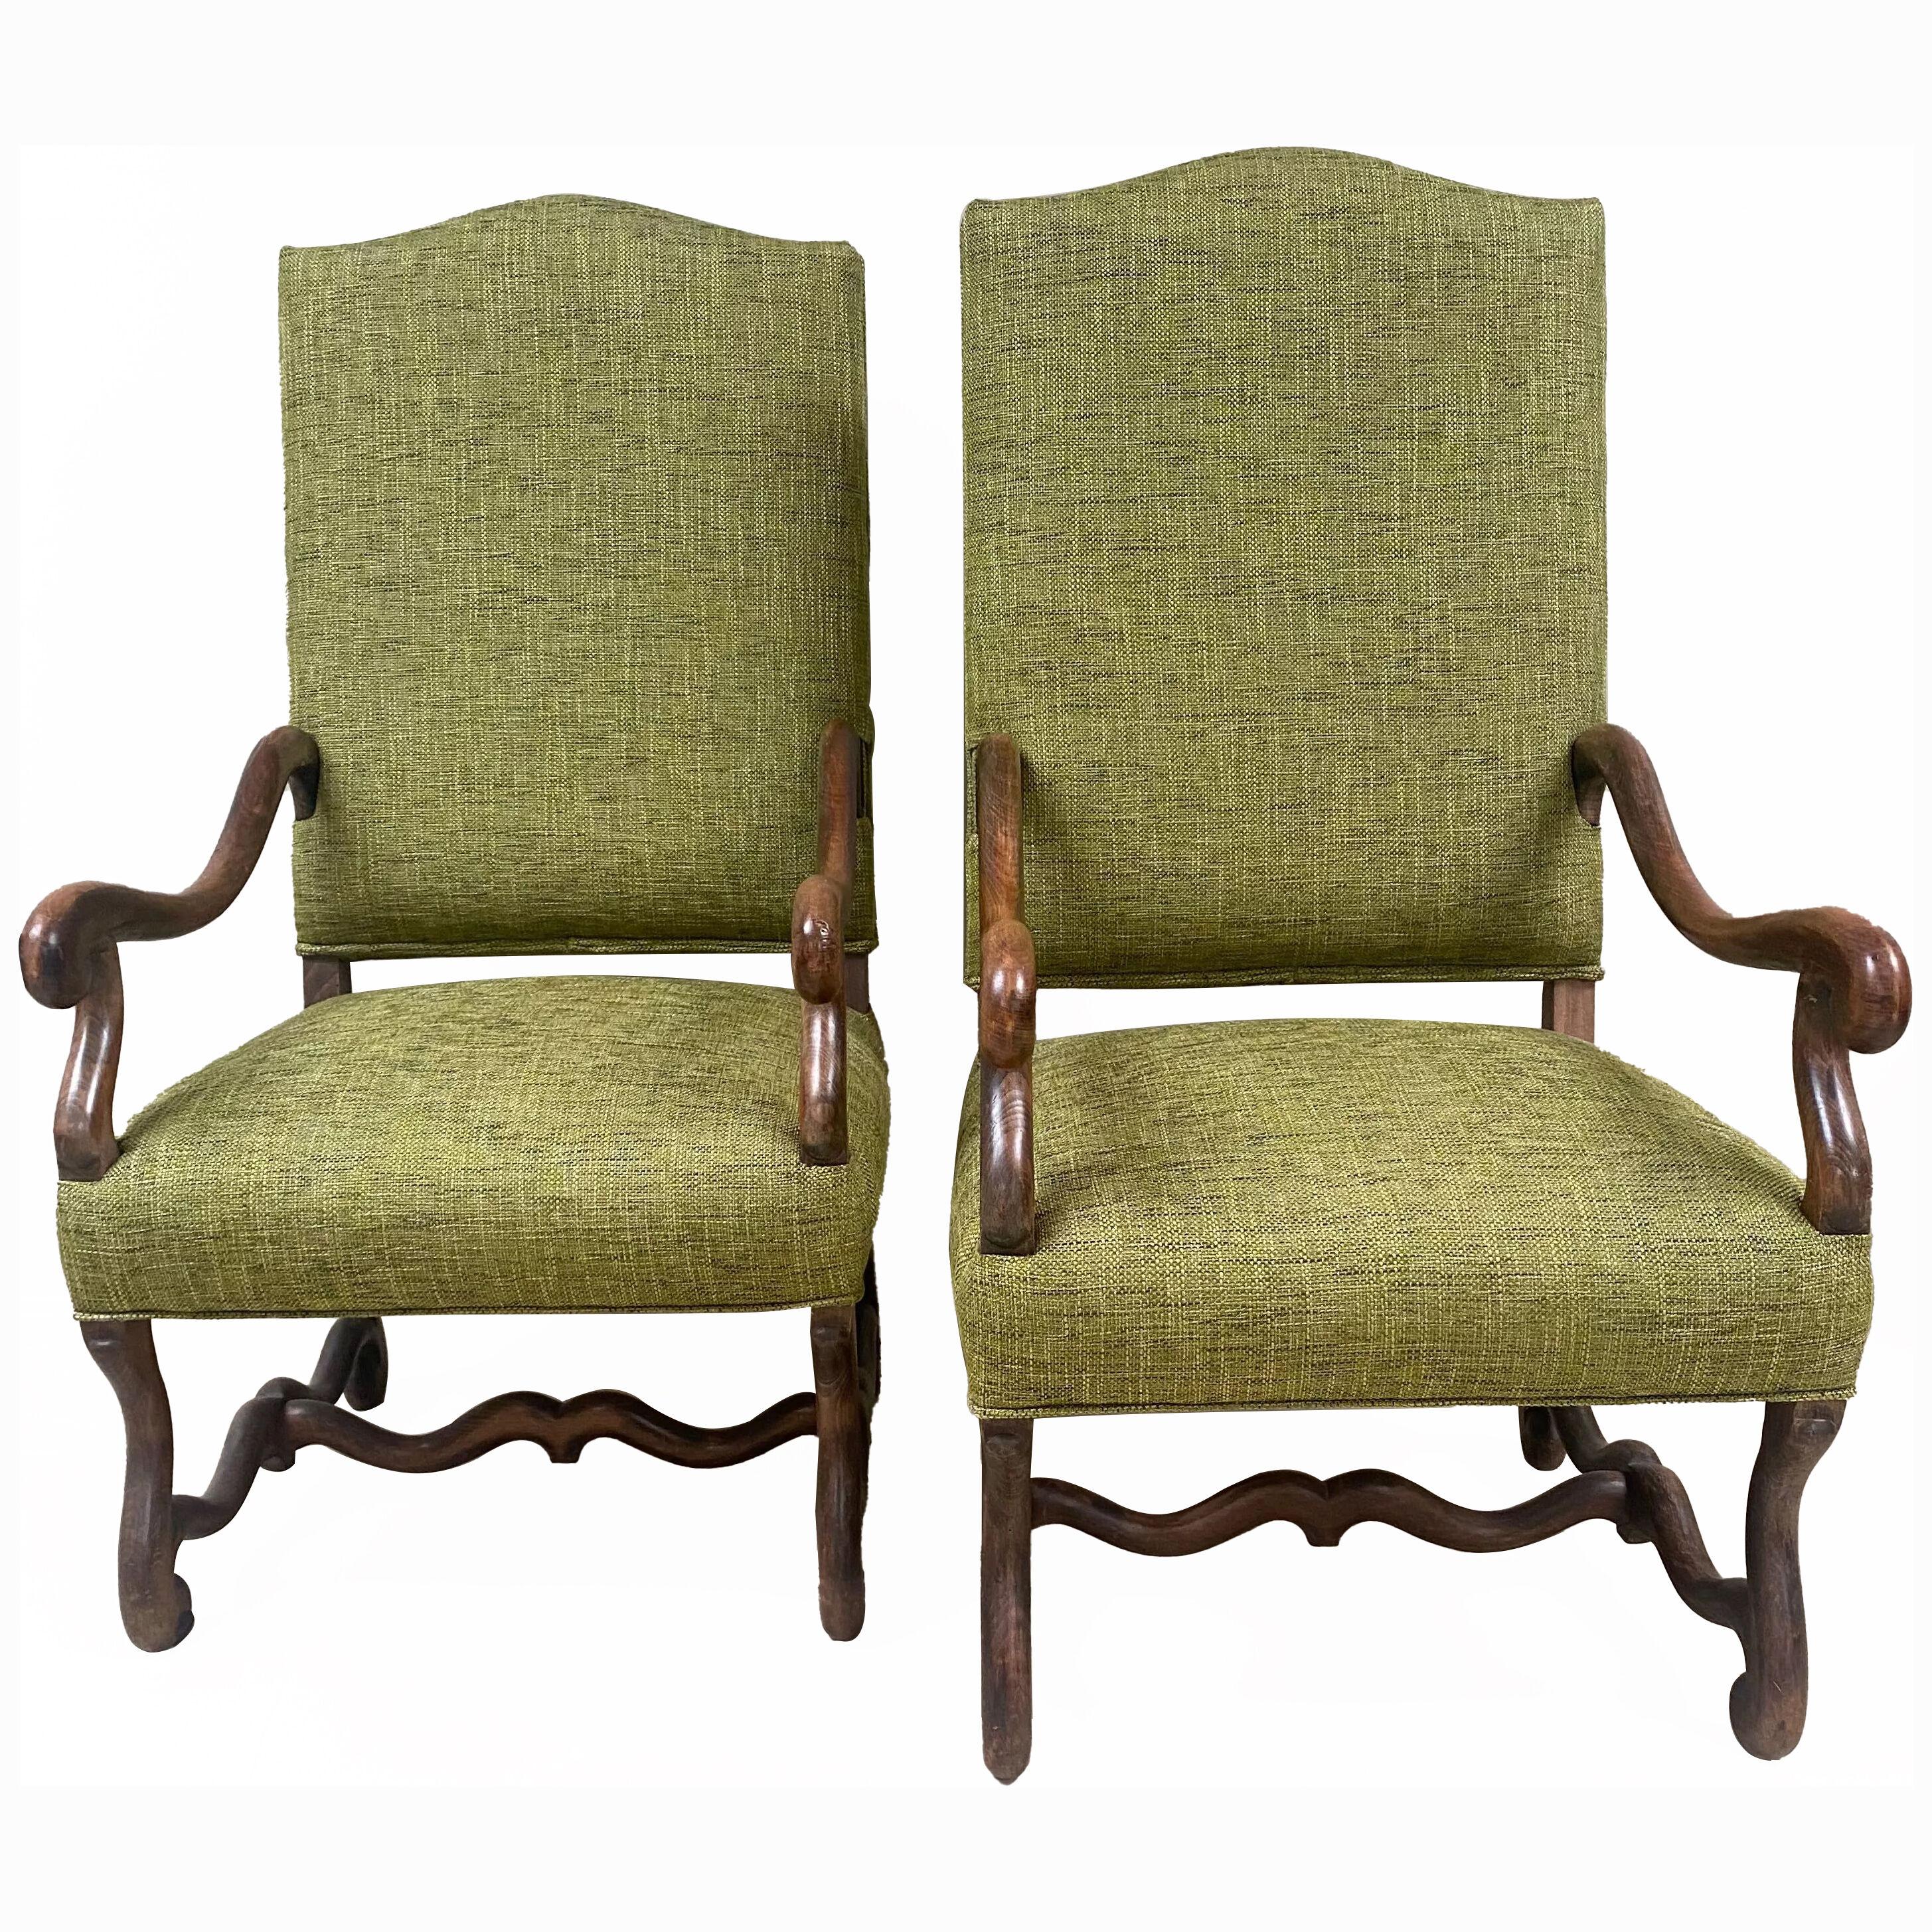 Antique Pair of Louis XIII Armchairs,Walnut,France